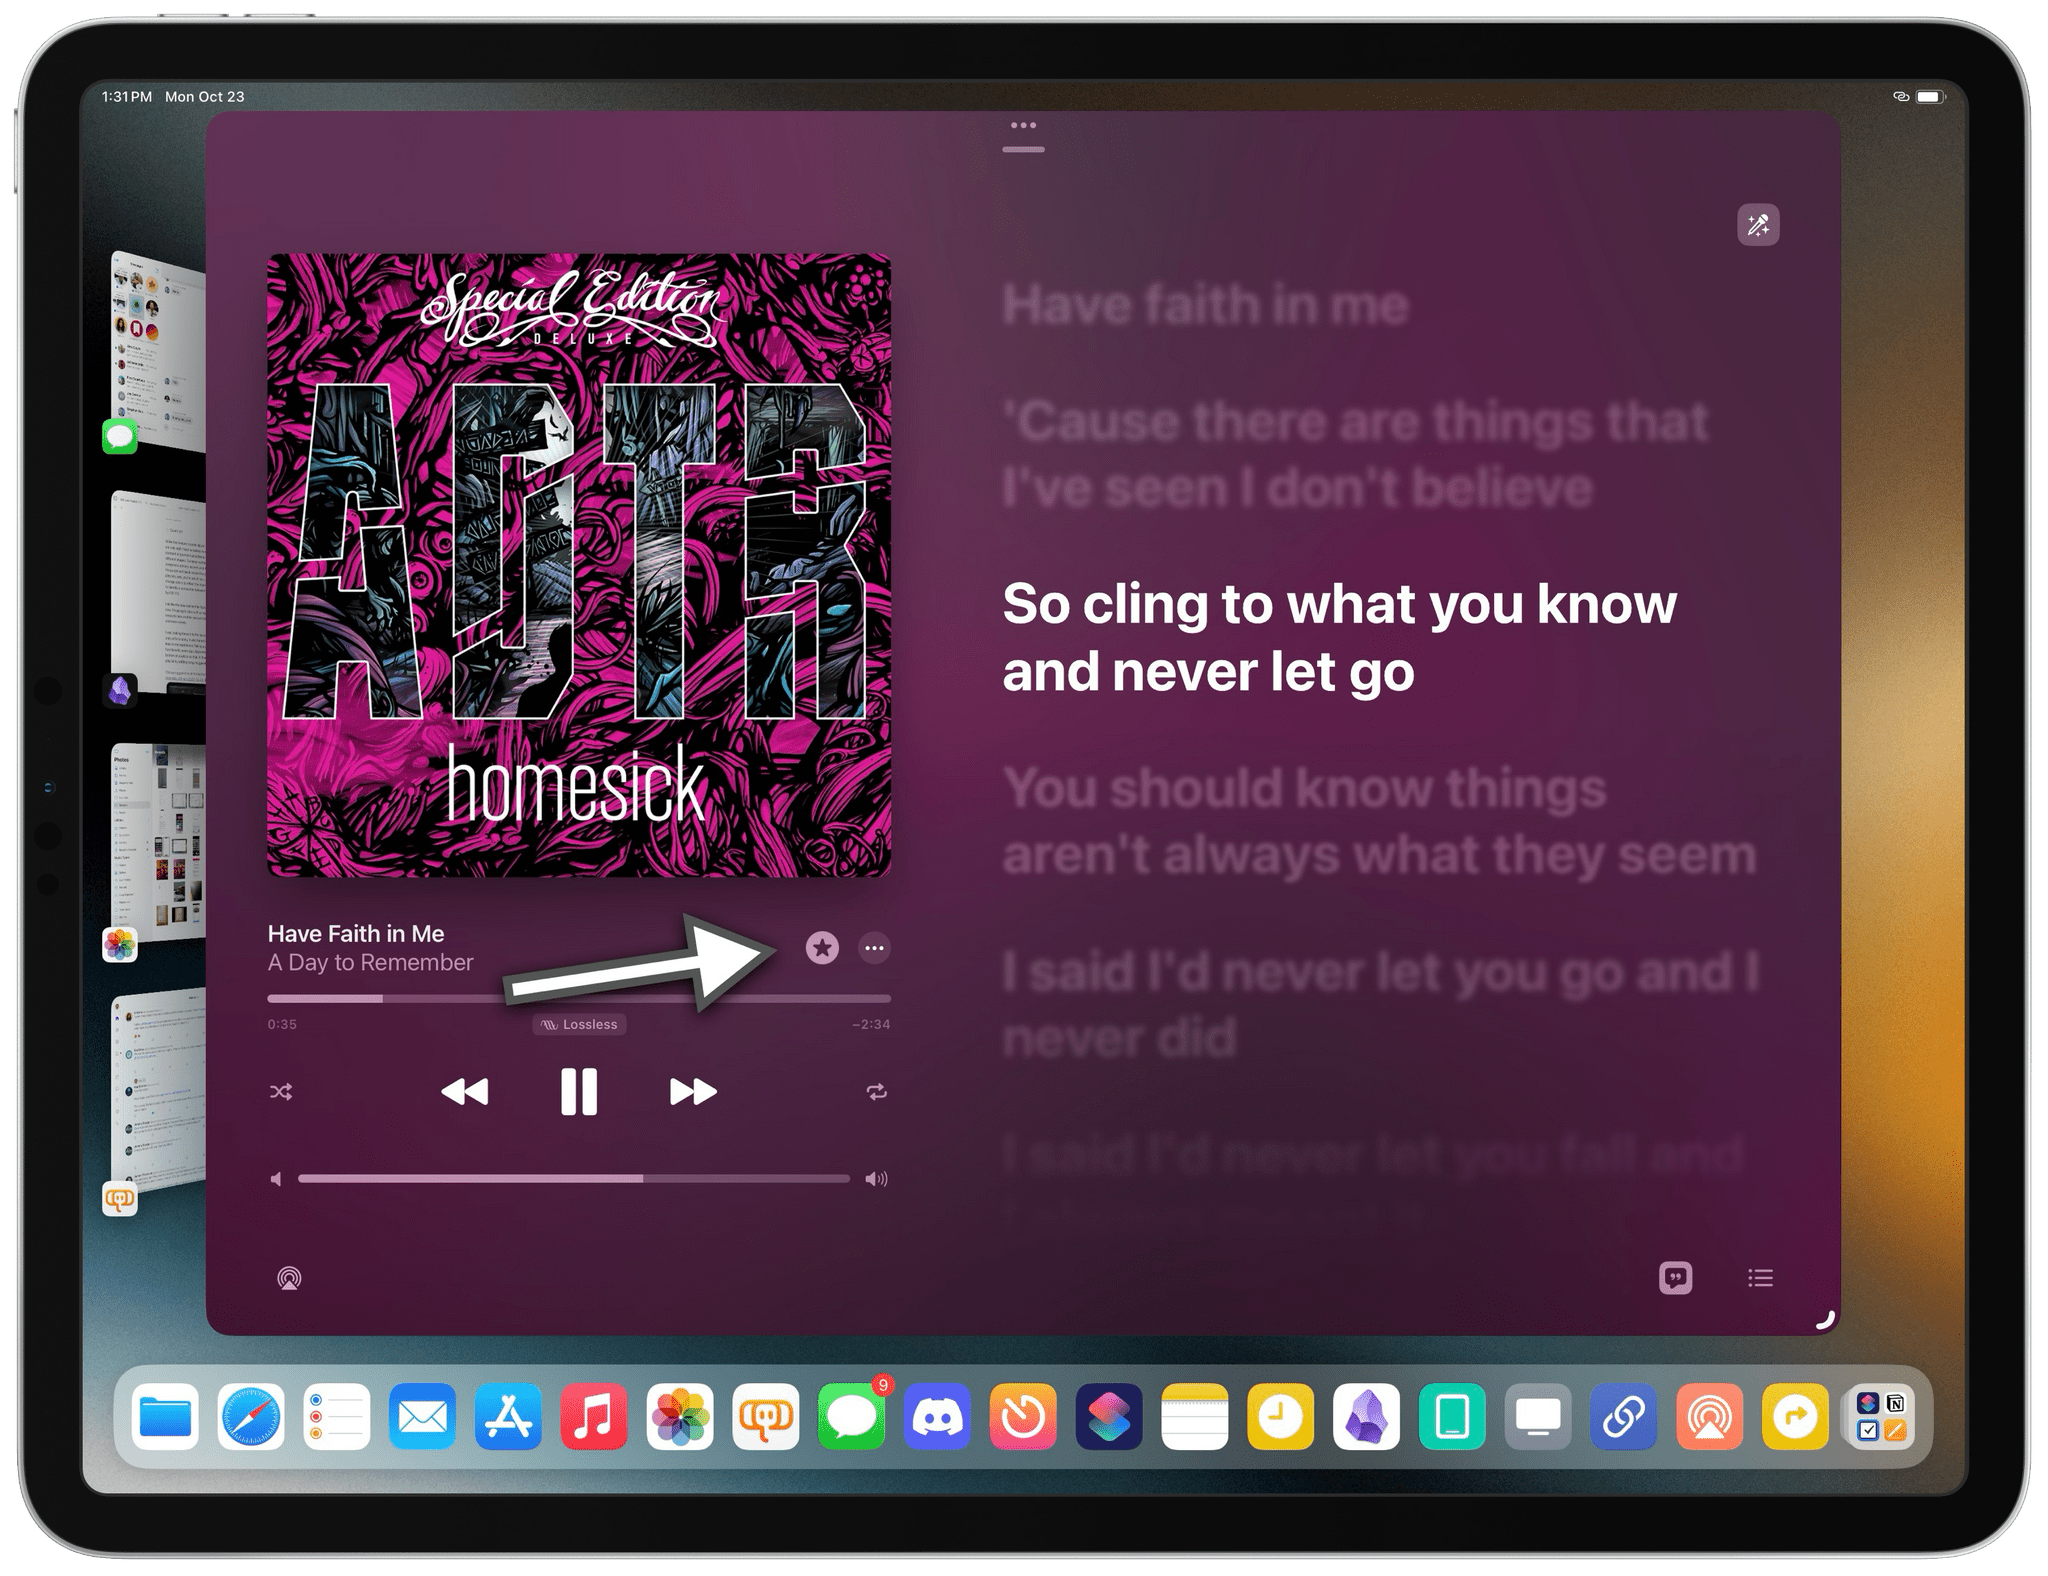 The Favorite button is now *very* prominent in different screens of the Music app, which makes it easier than before to build a collection of favorite songs, albums, and playlists. The animation when you tap it is also nice.